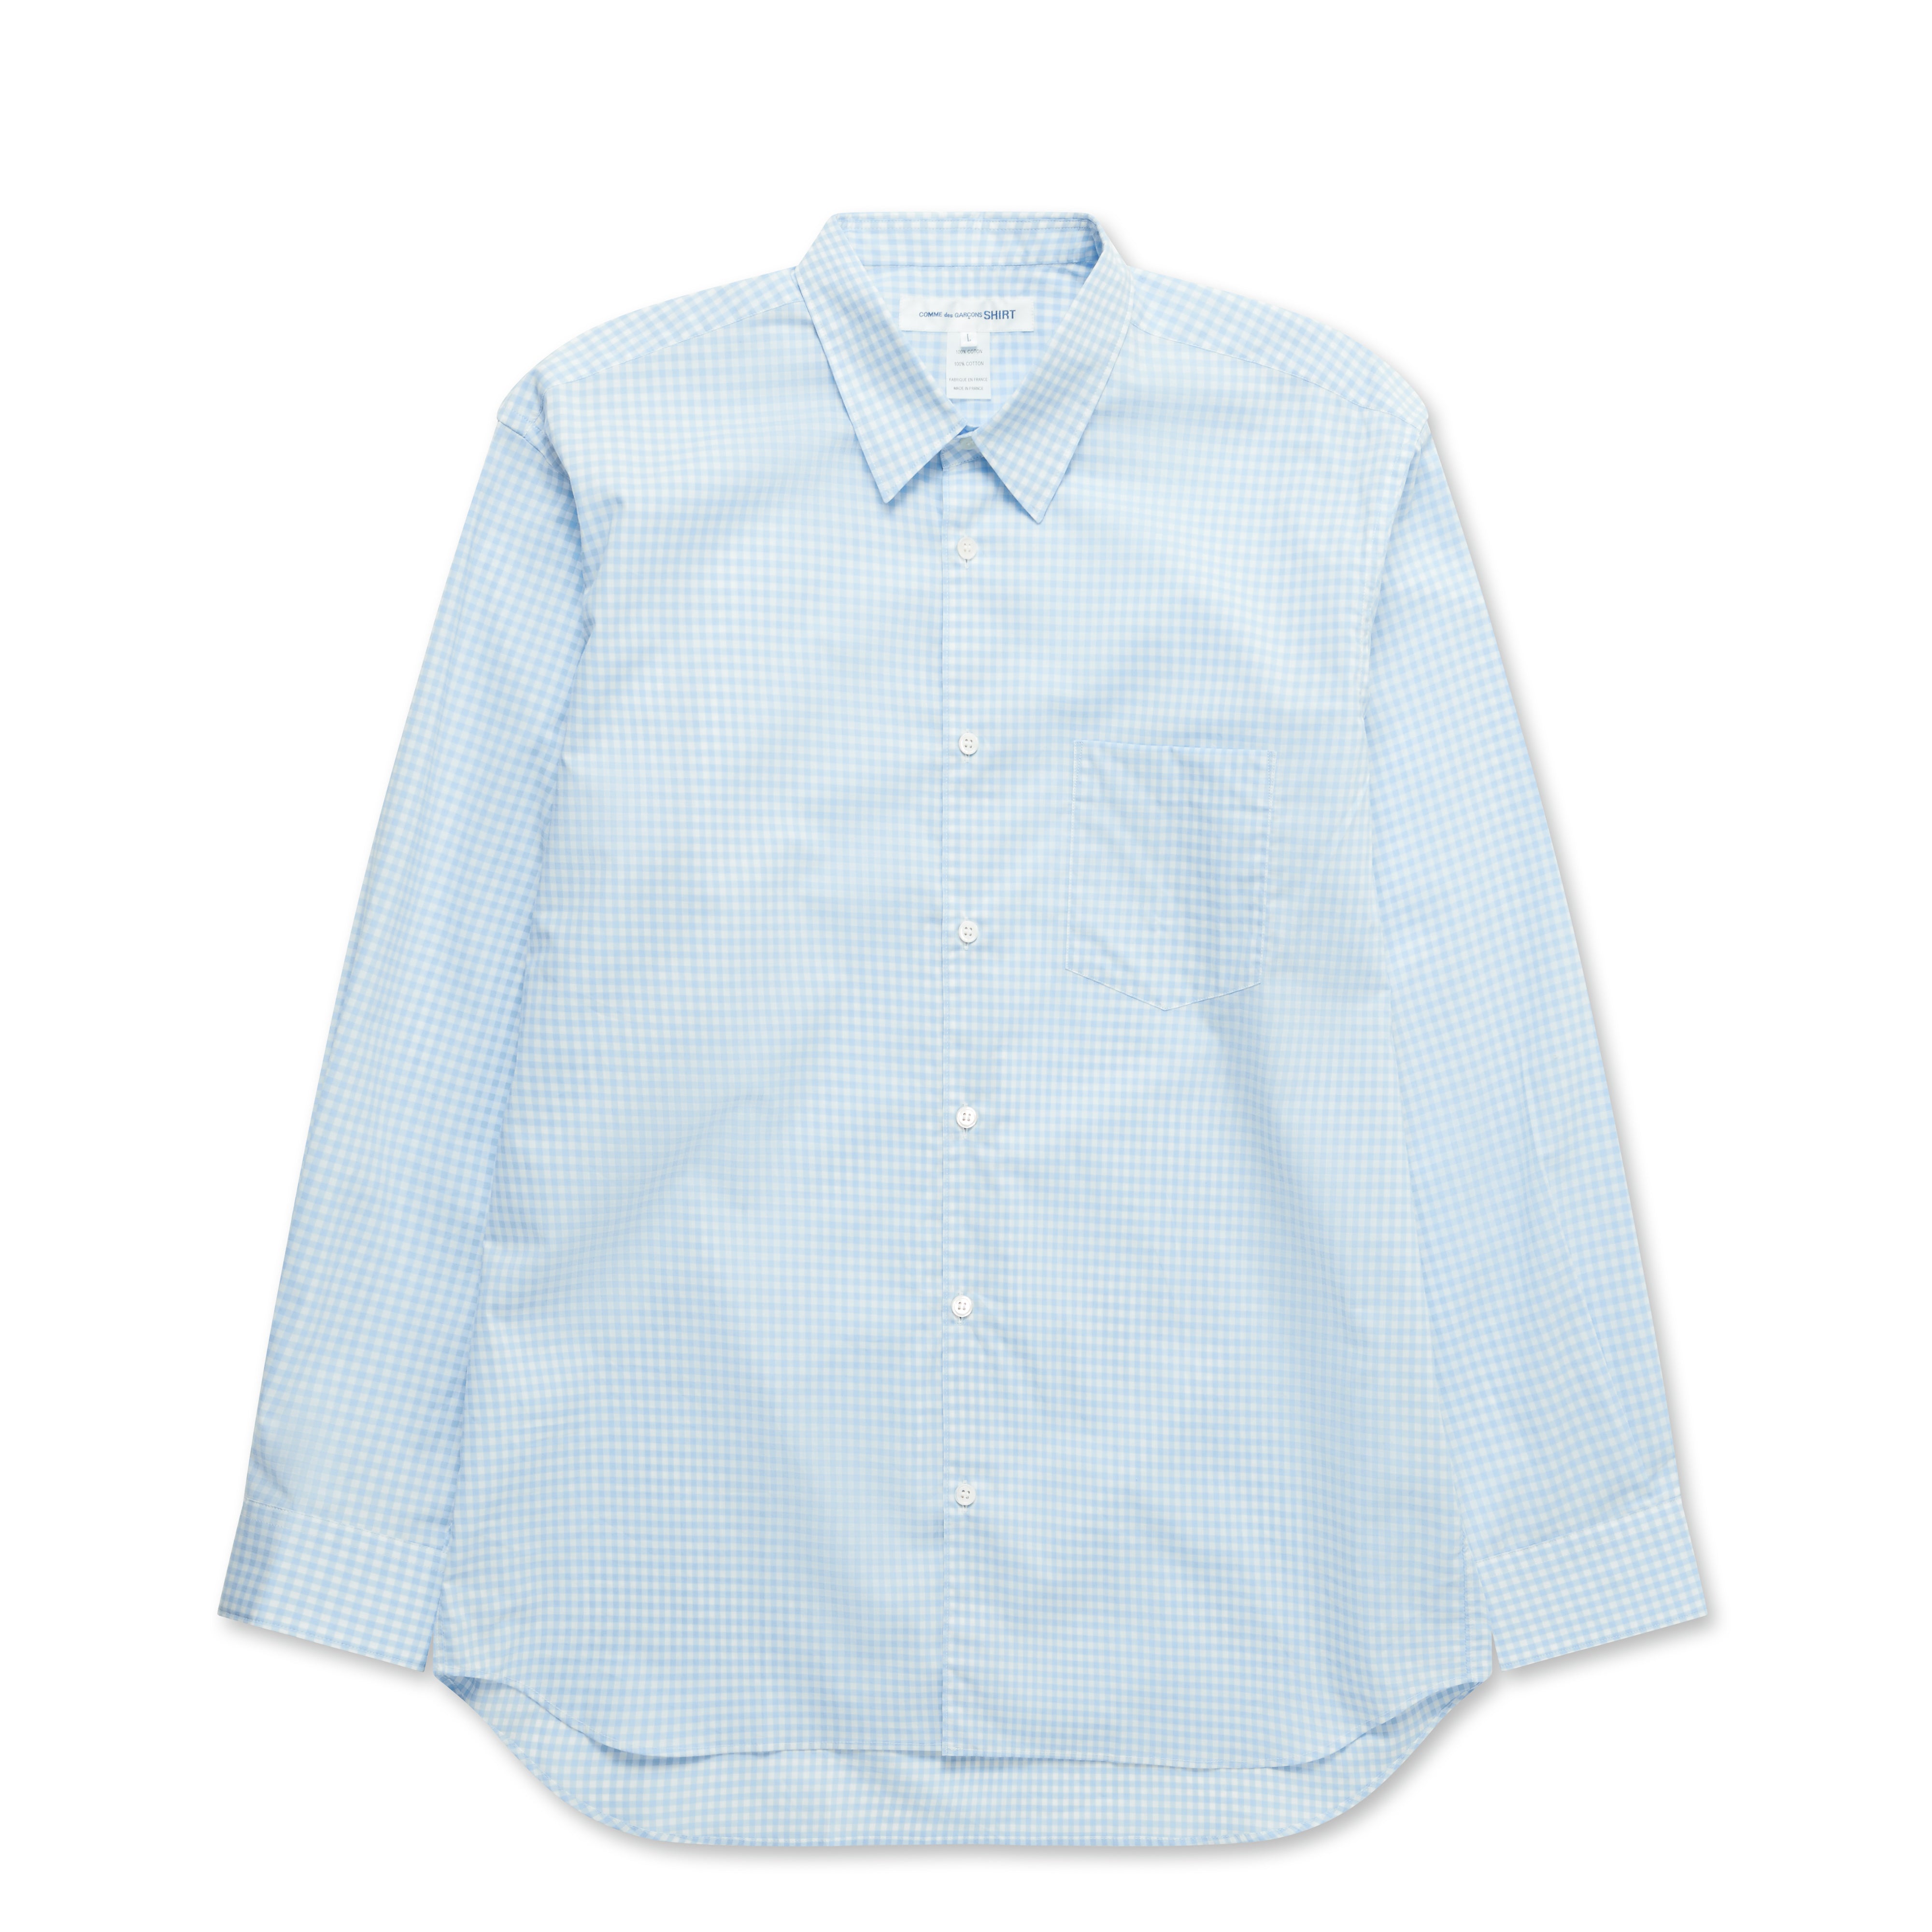 CDG Shirt Forever Wide Fit Striped Woven Cotton Shirt (Blue